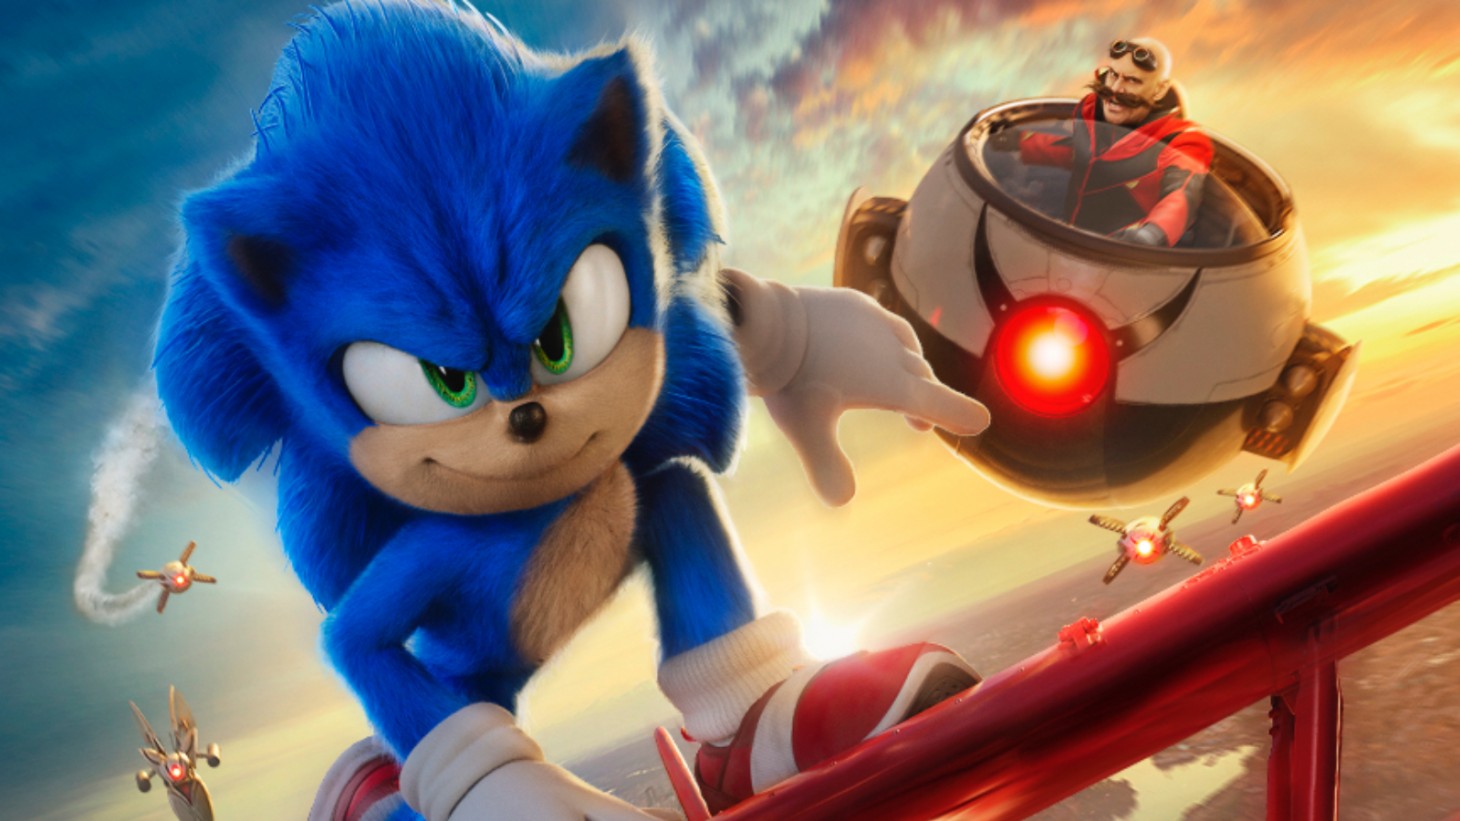 Sonic the Hedgehog 2 movie final trailer and throwback poster revealed -  Niche Gamer